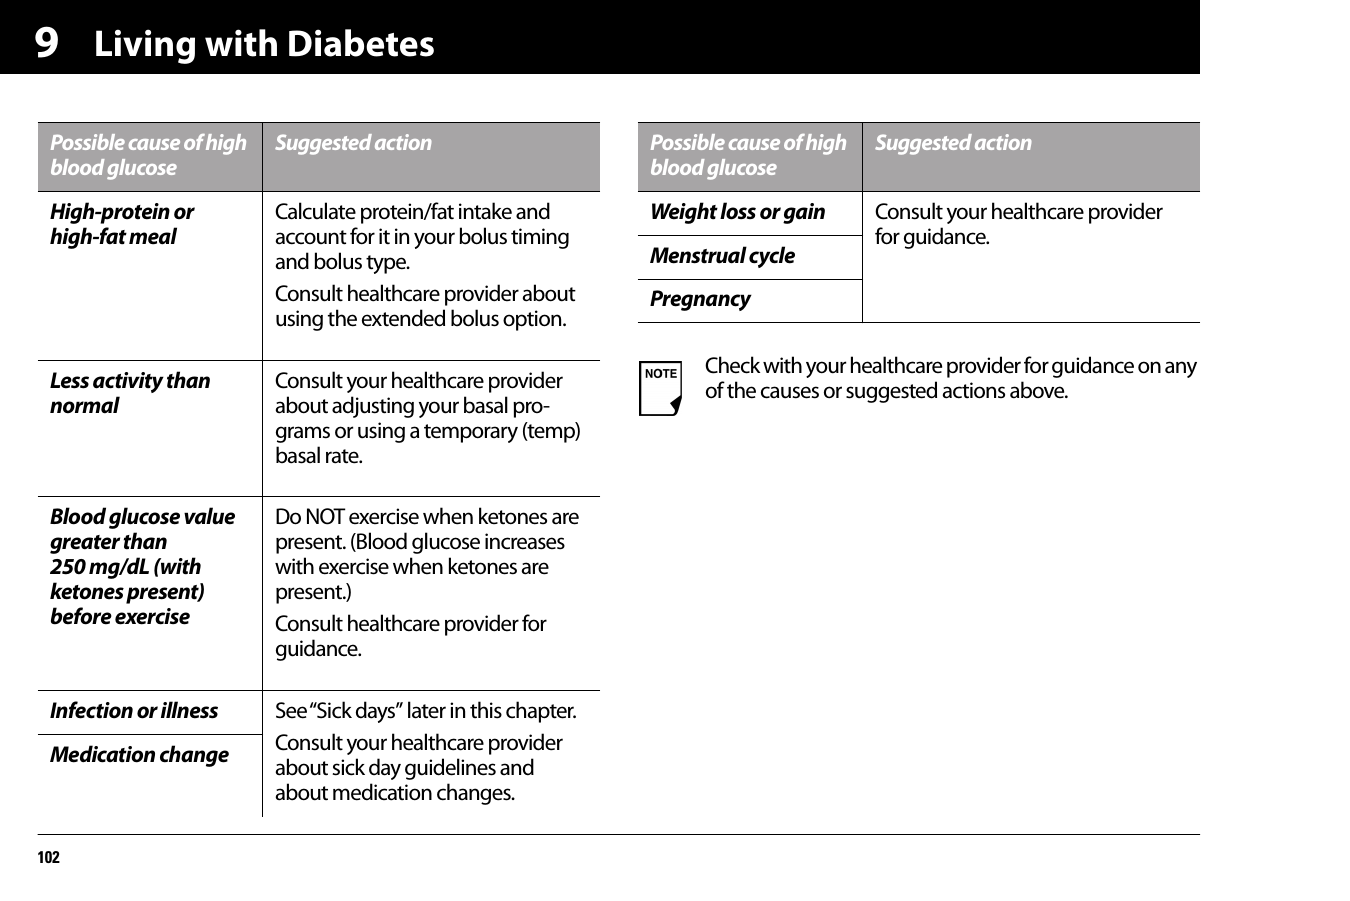 Living with Diabetes1029High-protein or high-fat mealCalculate protein/fat intake and account for it in your bolus timing and bolus type. Consult healthcare provider about using the extended bolus option.Less activity than normal Consult your healthcare provider about adjusting your basal pro-grams or using a temporary (temp) basal rate.Blood glucose value greater than 250 mg/dL (with ketones present) before exerciseDo NOT exercise when ketones are present. (Blood glucose increases with exercise when ketones are present.) Consult healthcare provider for guidance.Infection or illness See “Sick days” later in this chapter.Consult your healthcare provider about sick day guidelines and about medication changes.Medication changePossible cause of high blood glucoseSuggested actionWeight loss or gain Consult your healthcare provider for guidance.Menstrual cyclePregnancyCheck with your healthcare provider for guidance on any of the causes or suggested actions above.Possible cause of high blood glucoseSuggested action